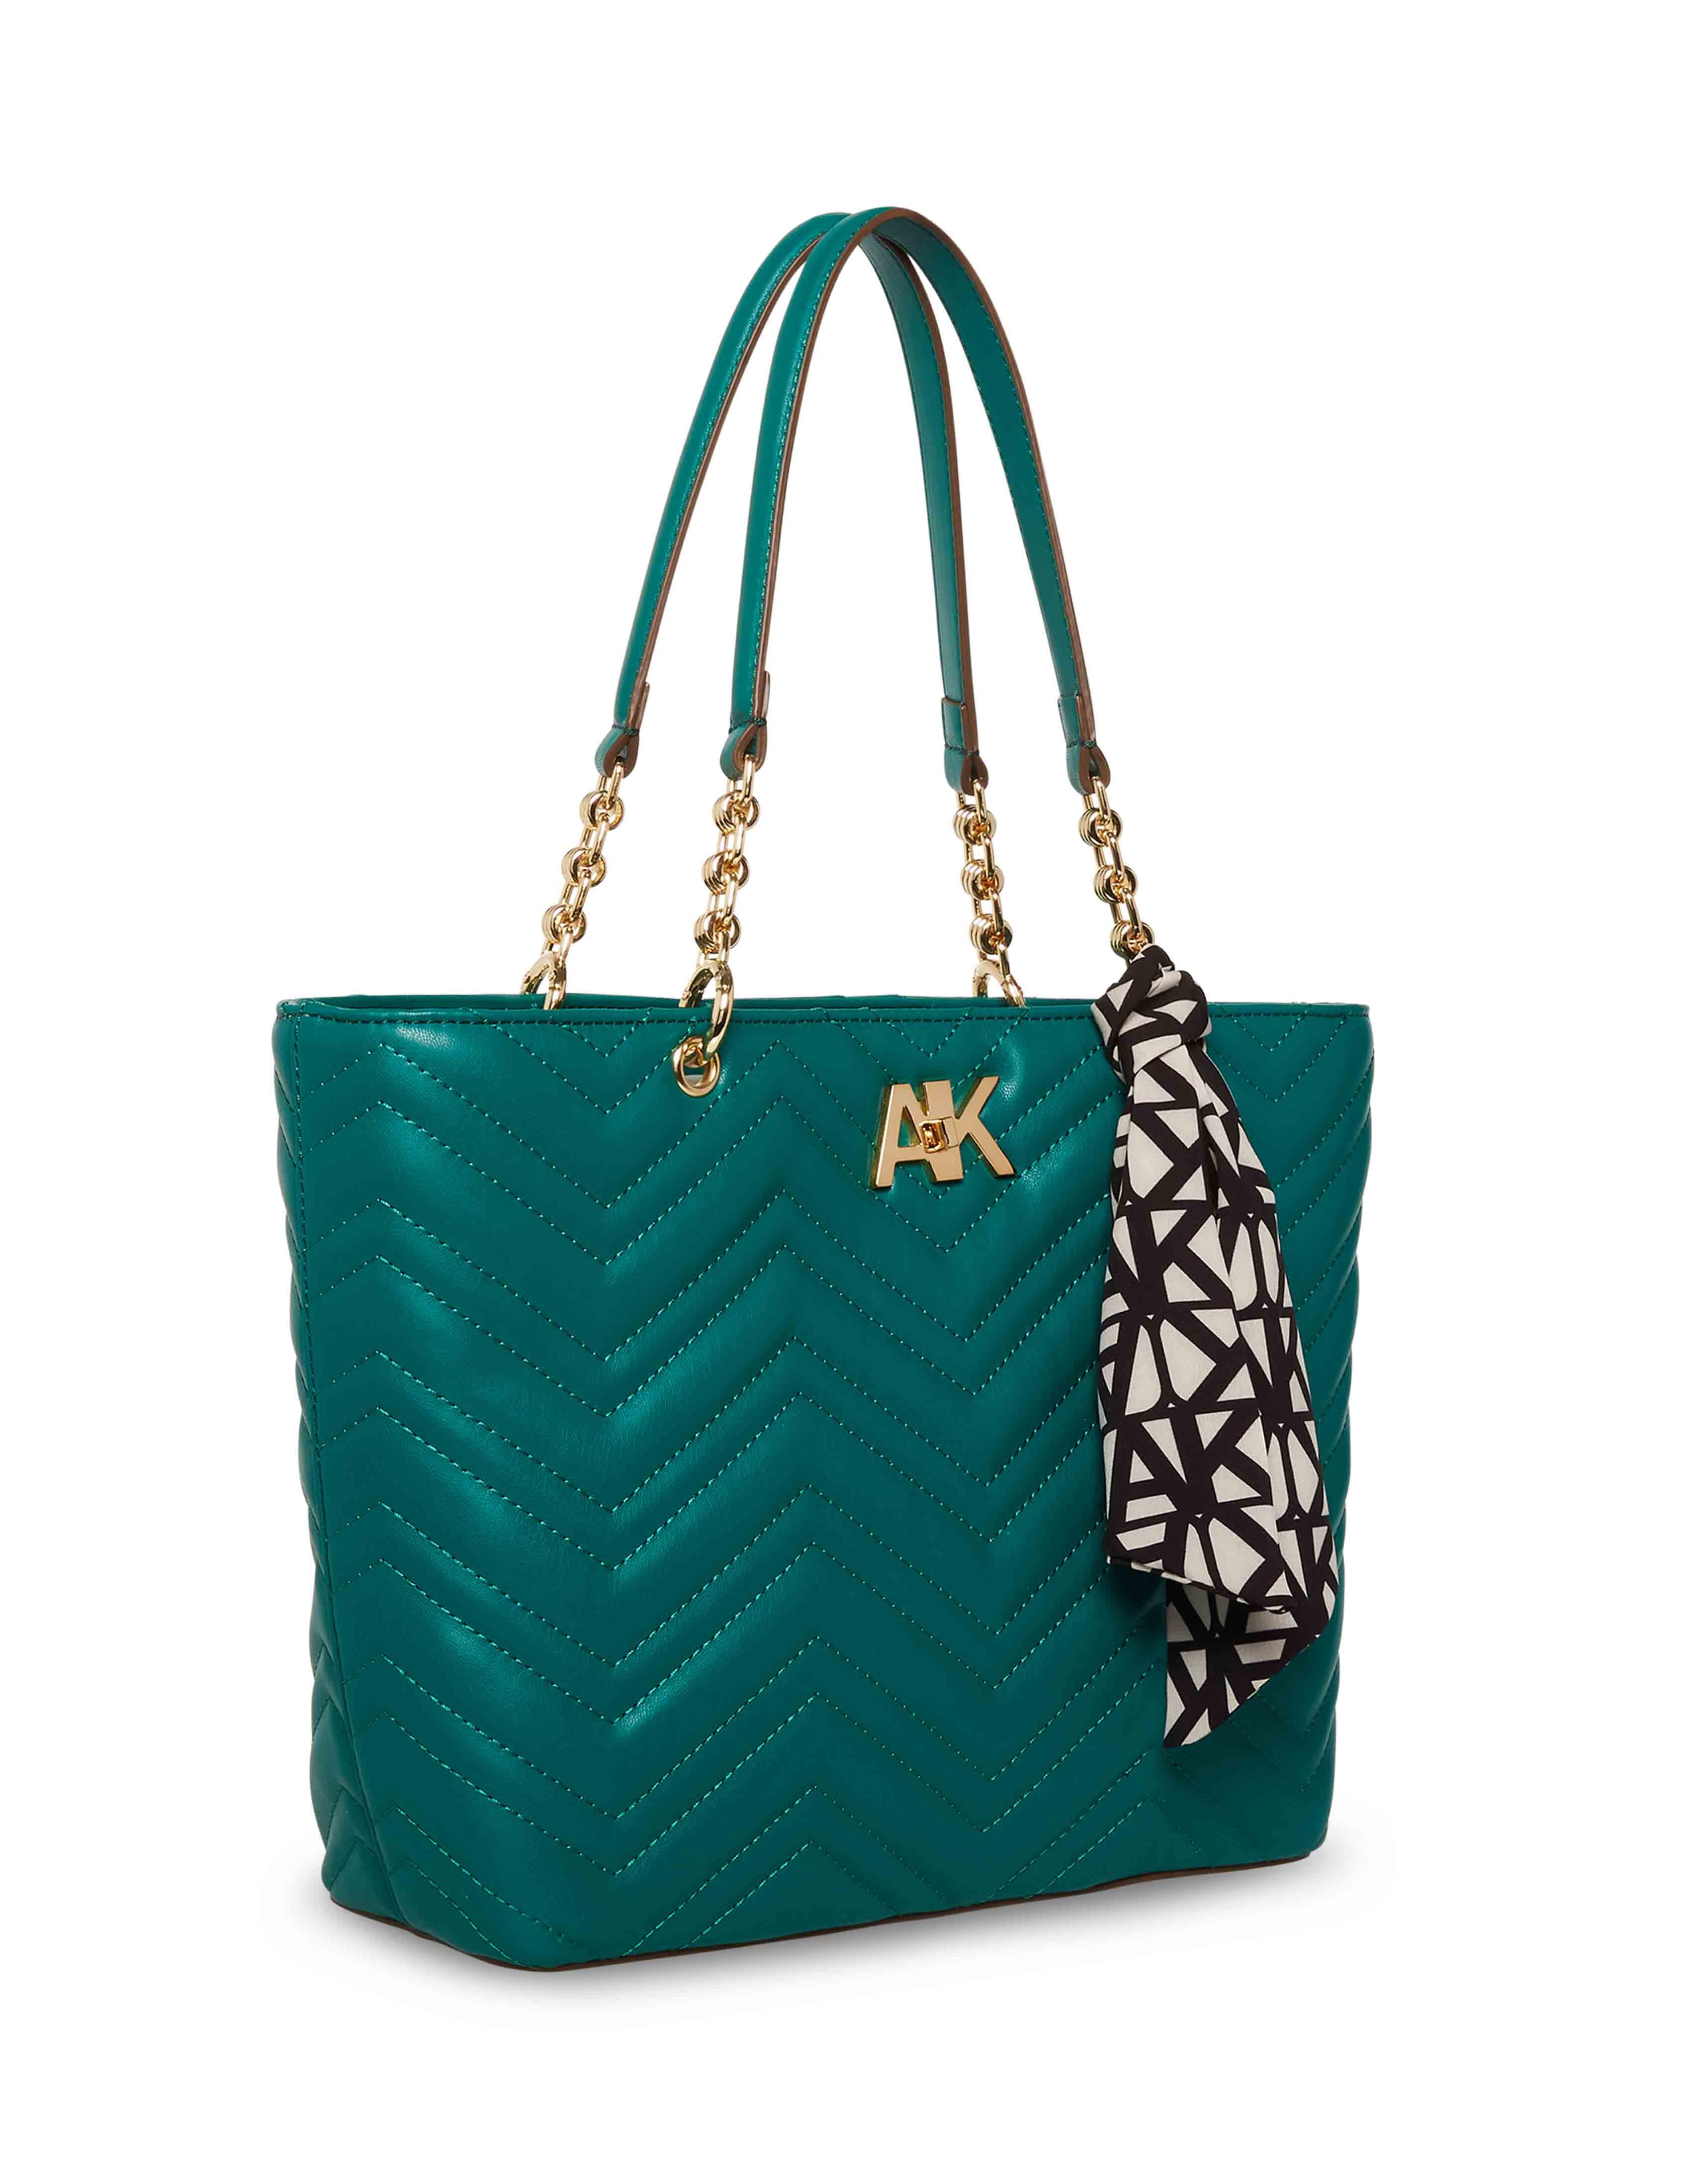 Anne Klein Women's Quilted Chain Tote with Turn Lock in Emerald size 9.5"